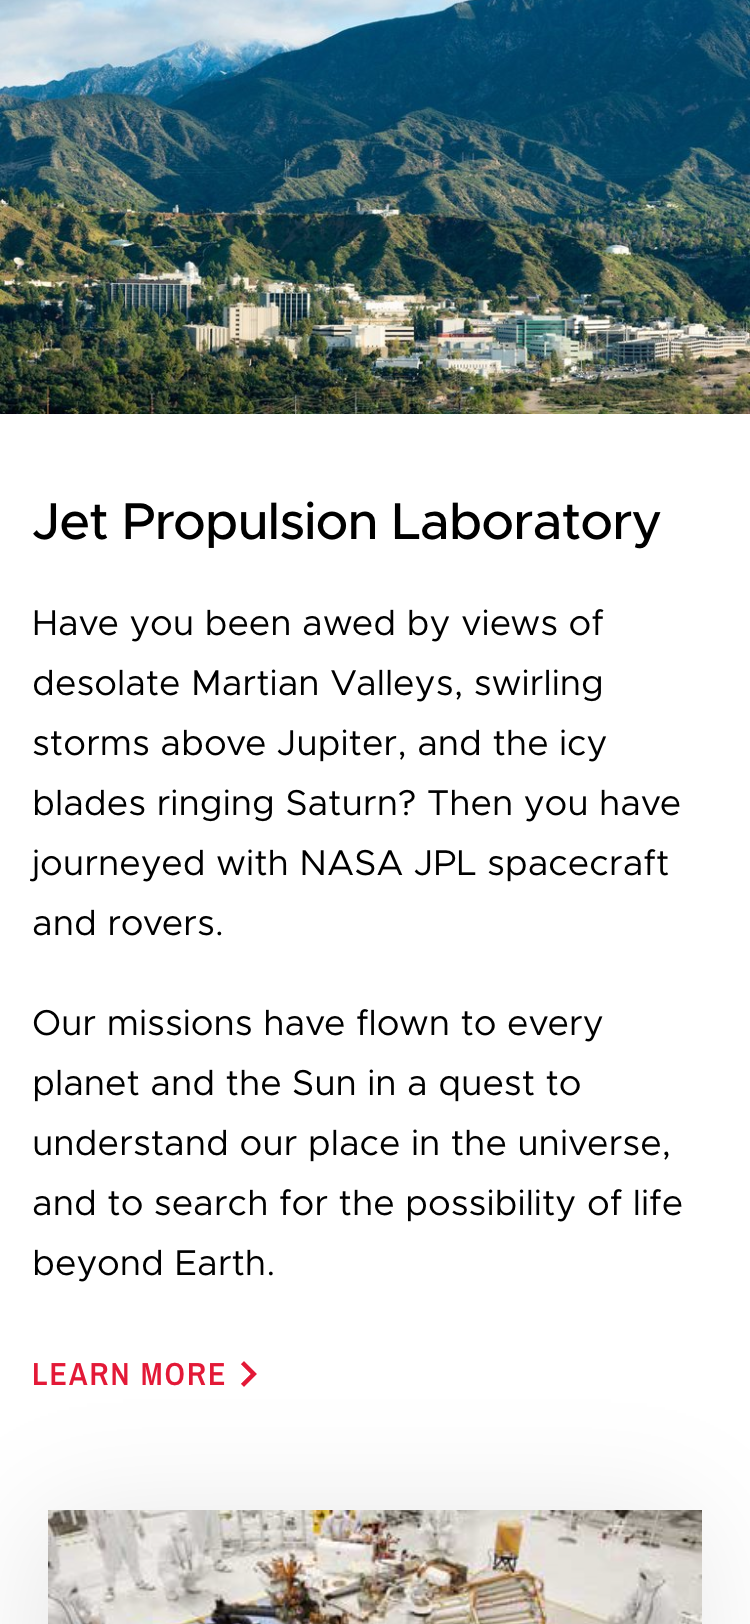 Mobile screenshot of the 'Jet Propulsion Laboratory' section on the NASA Jet Propulsion Laboratory website. At the top of the screen is a photograph of the laboratory, followed by a summary and a link to 'learn more'.